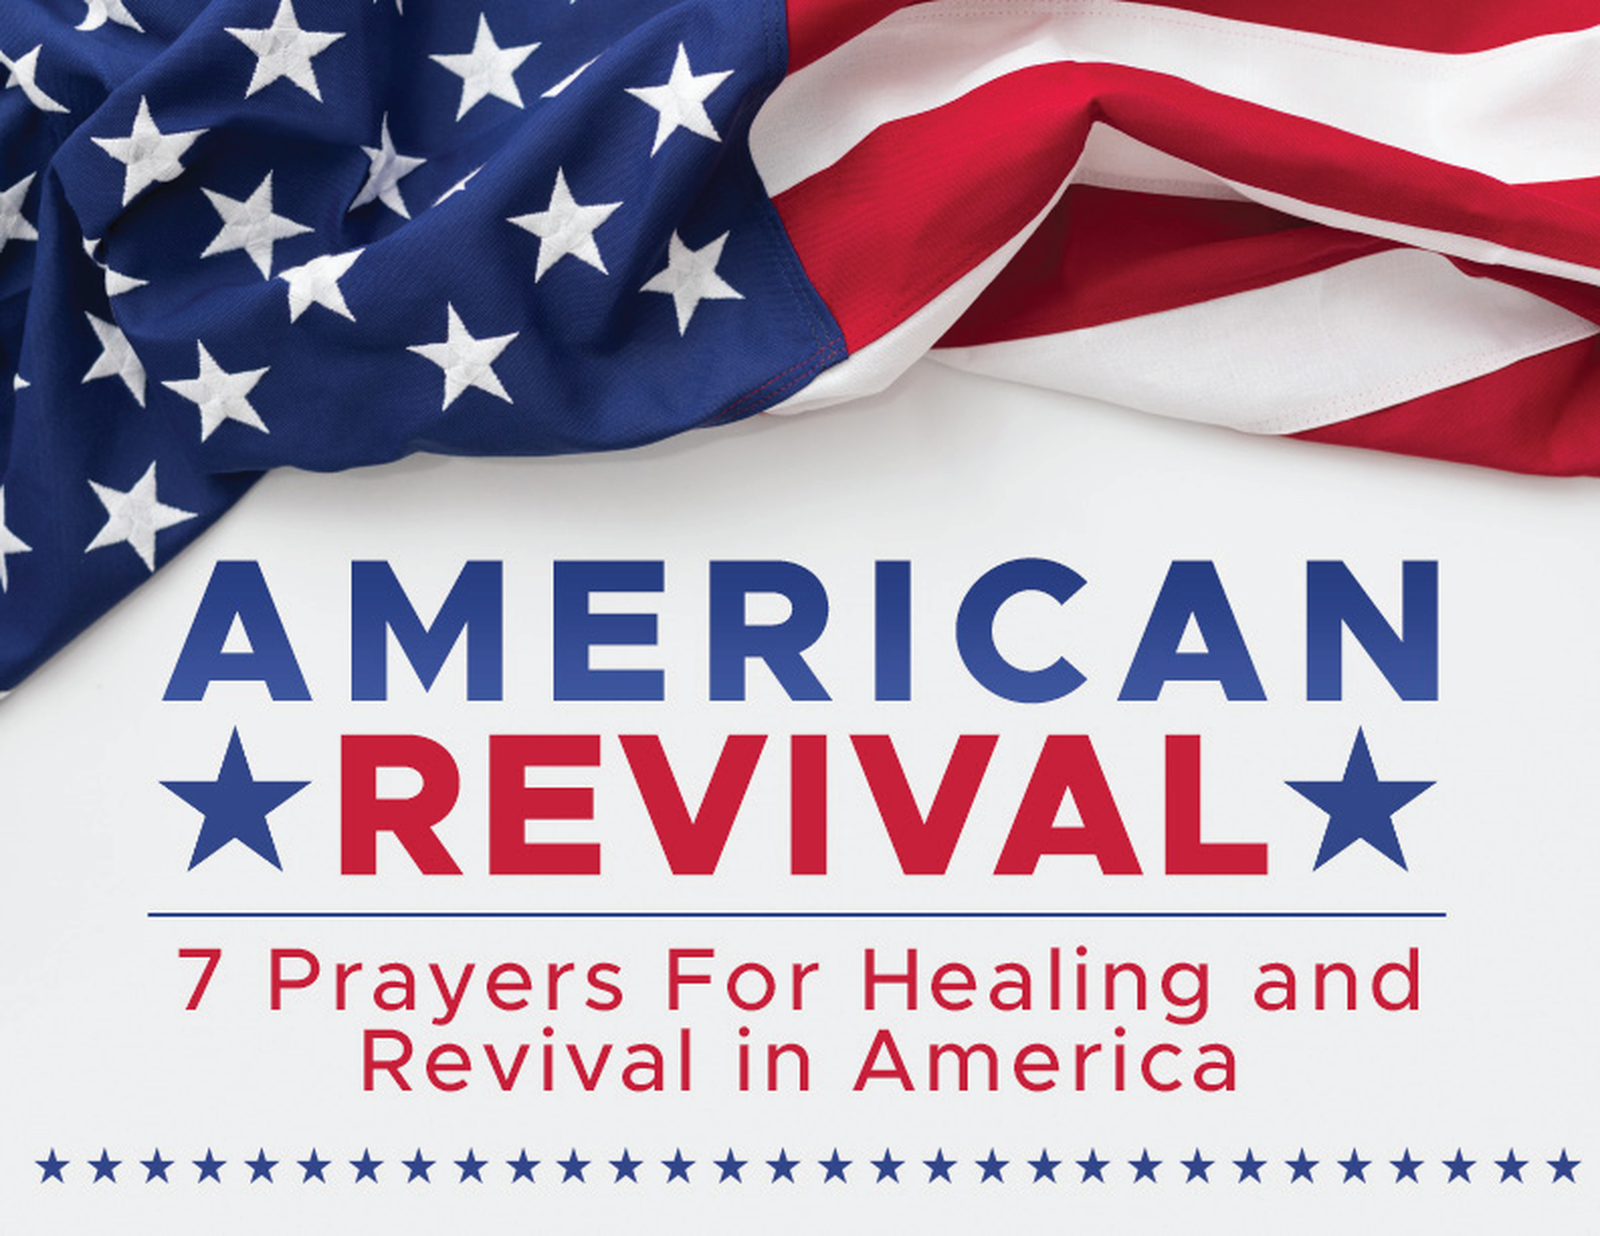 7 Prayers for Healing and Revival in America